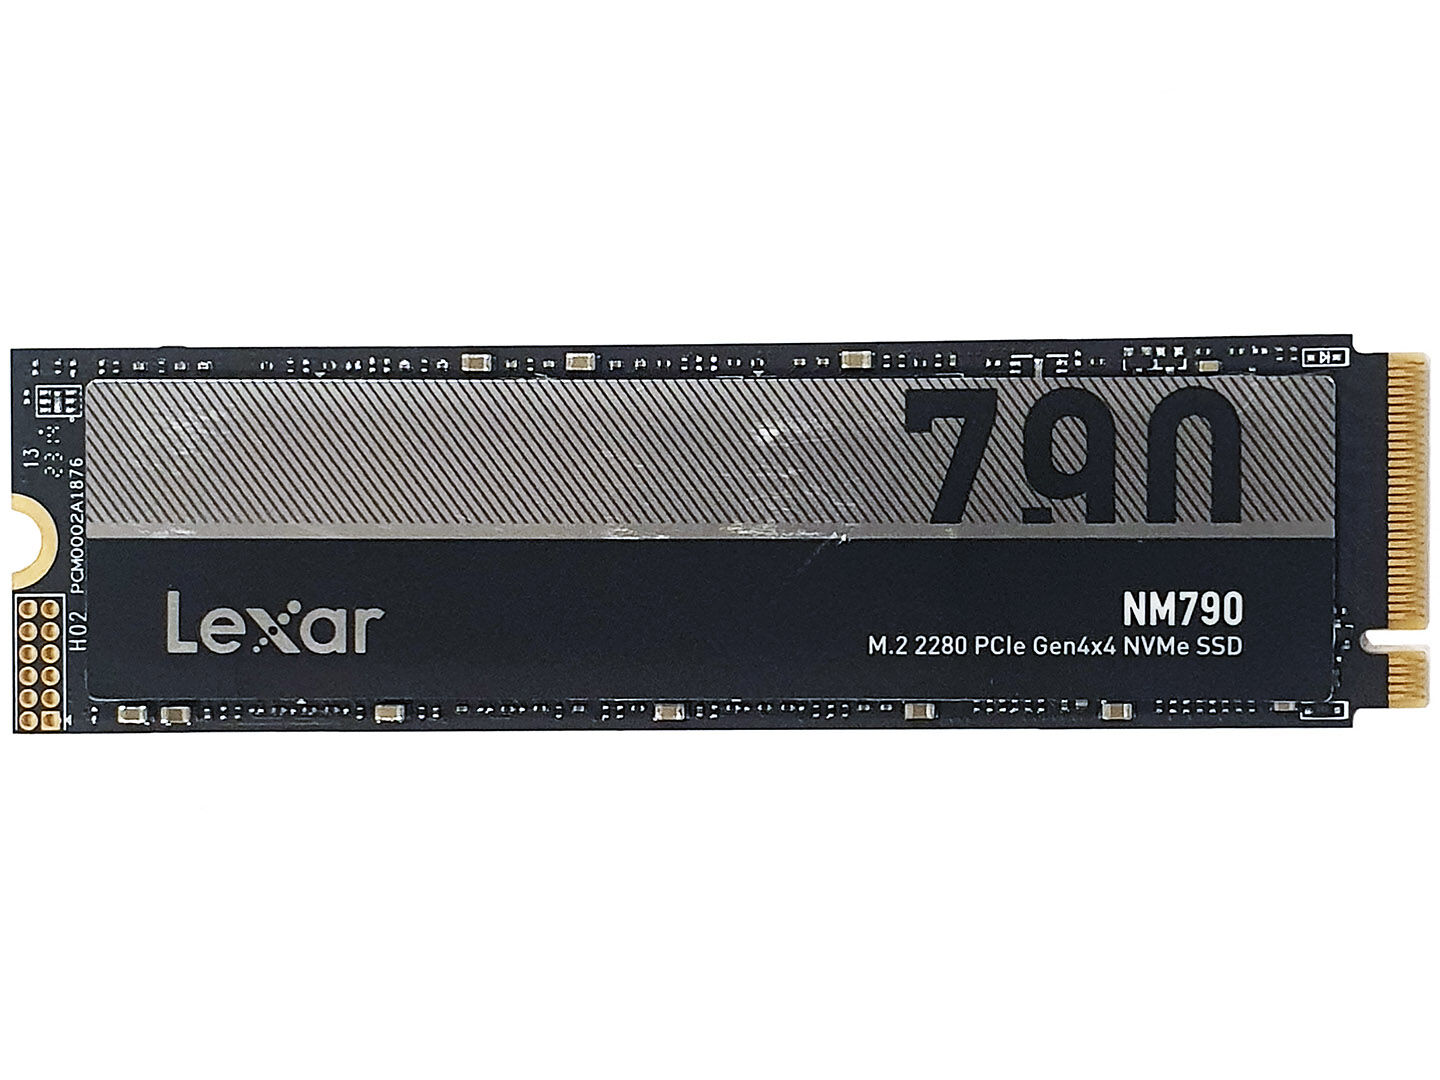 Lexar's NM790 PCIe Gen 4 SSD Boasts A High Capacity And Ultra-Fast Speeds;  4TB Version Can Be Yours For Just $249.99